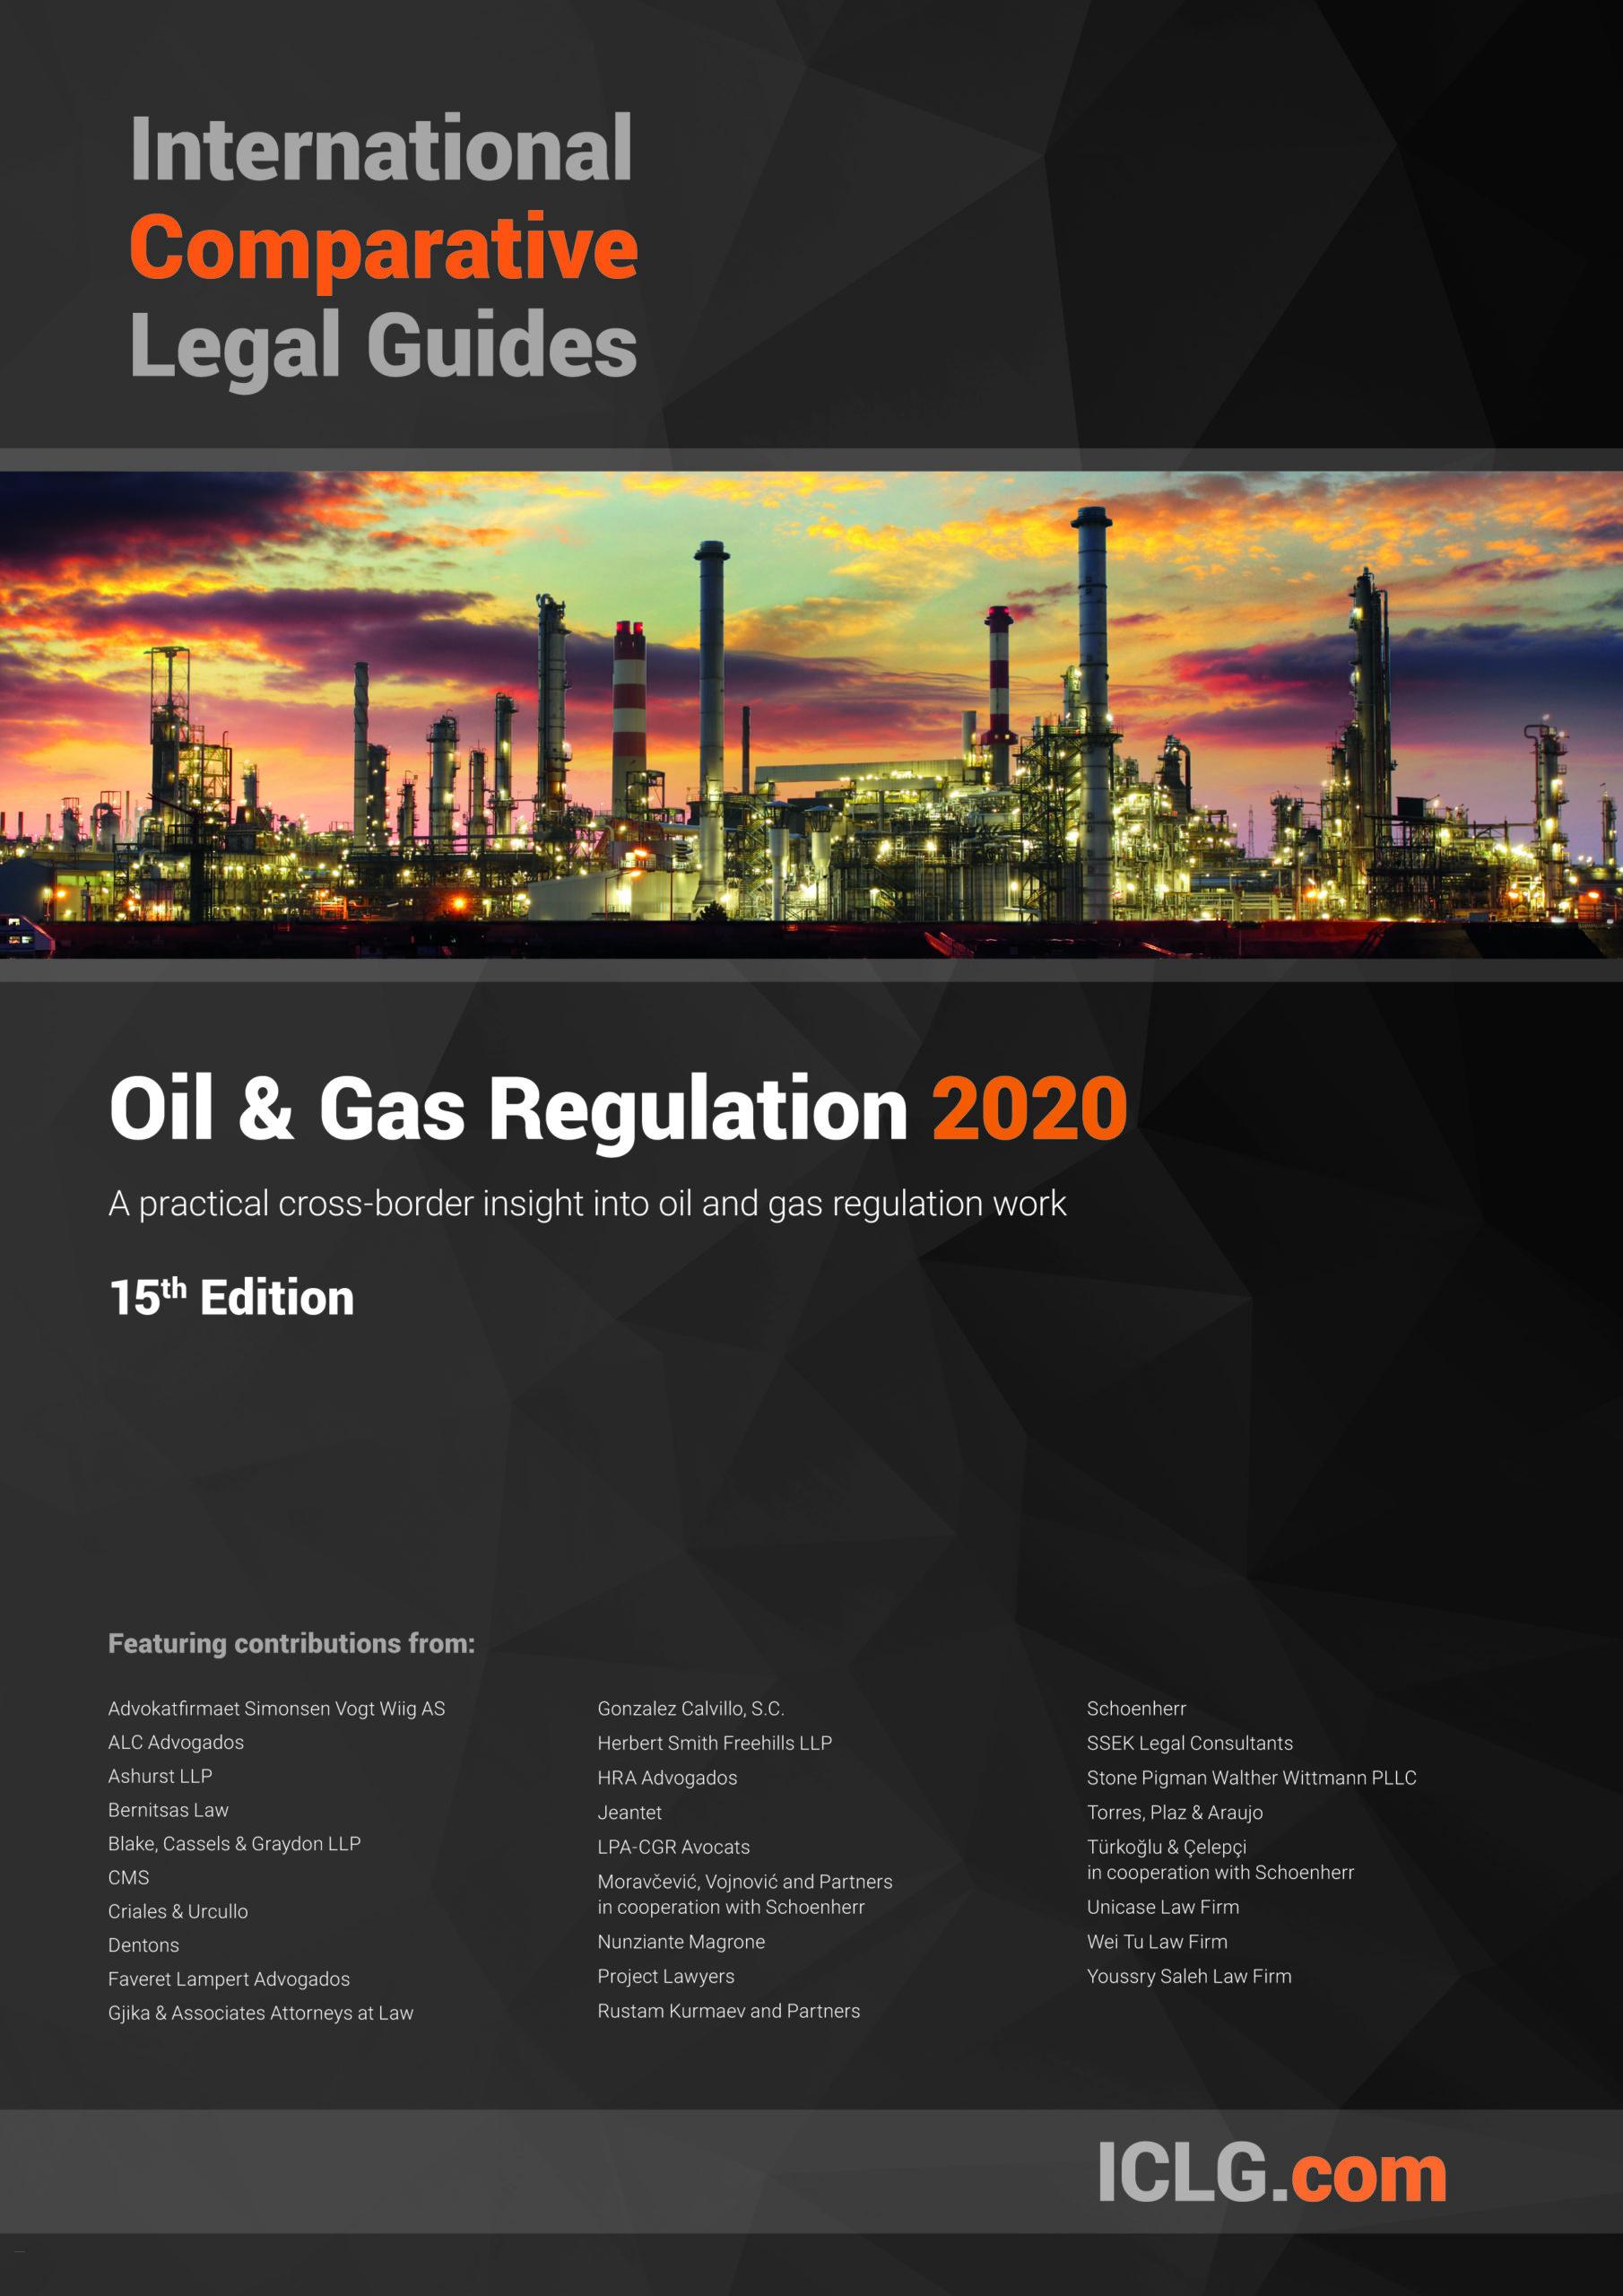 The International Comparative Legal Guide to Oil & Gas Regulation 2020